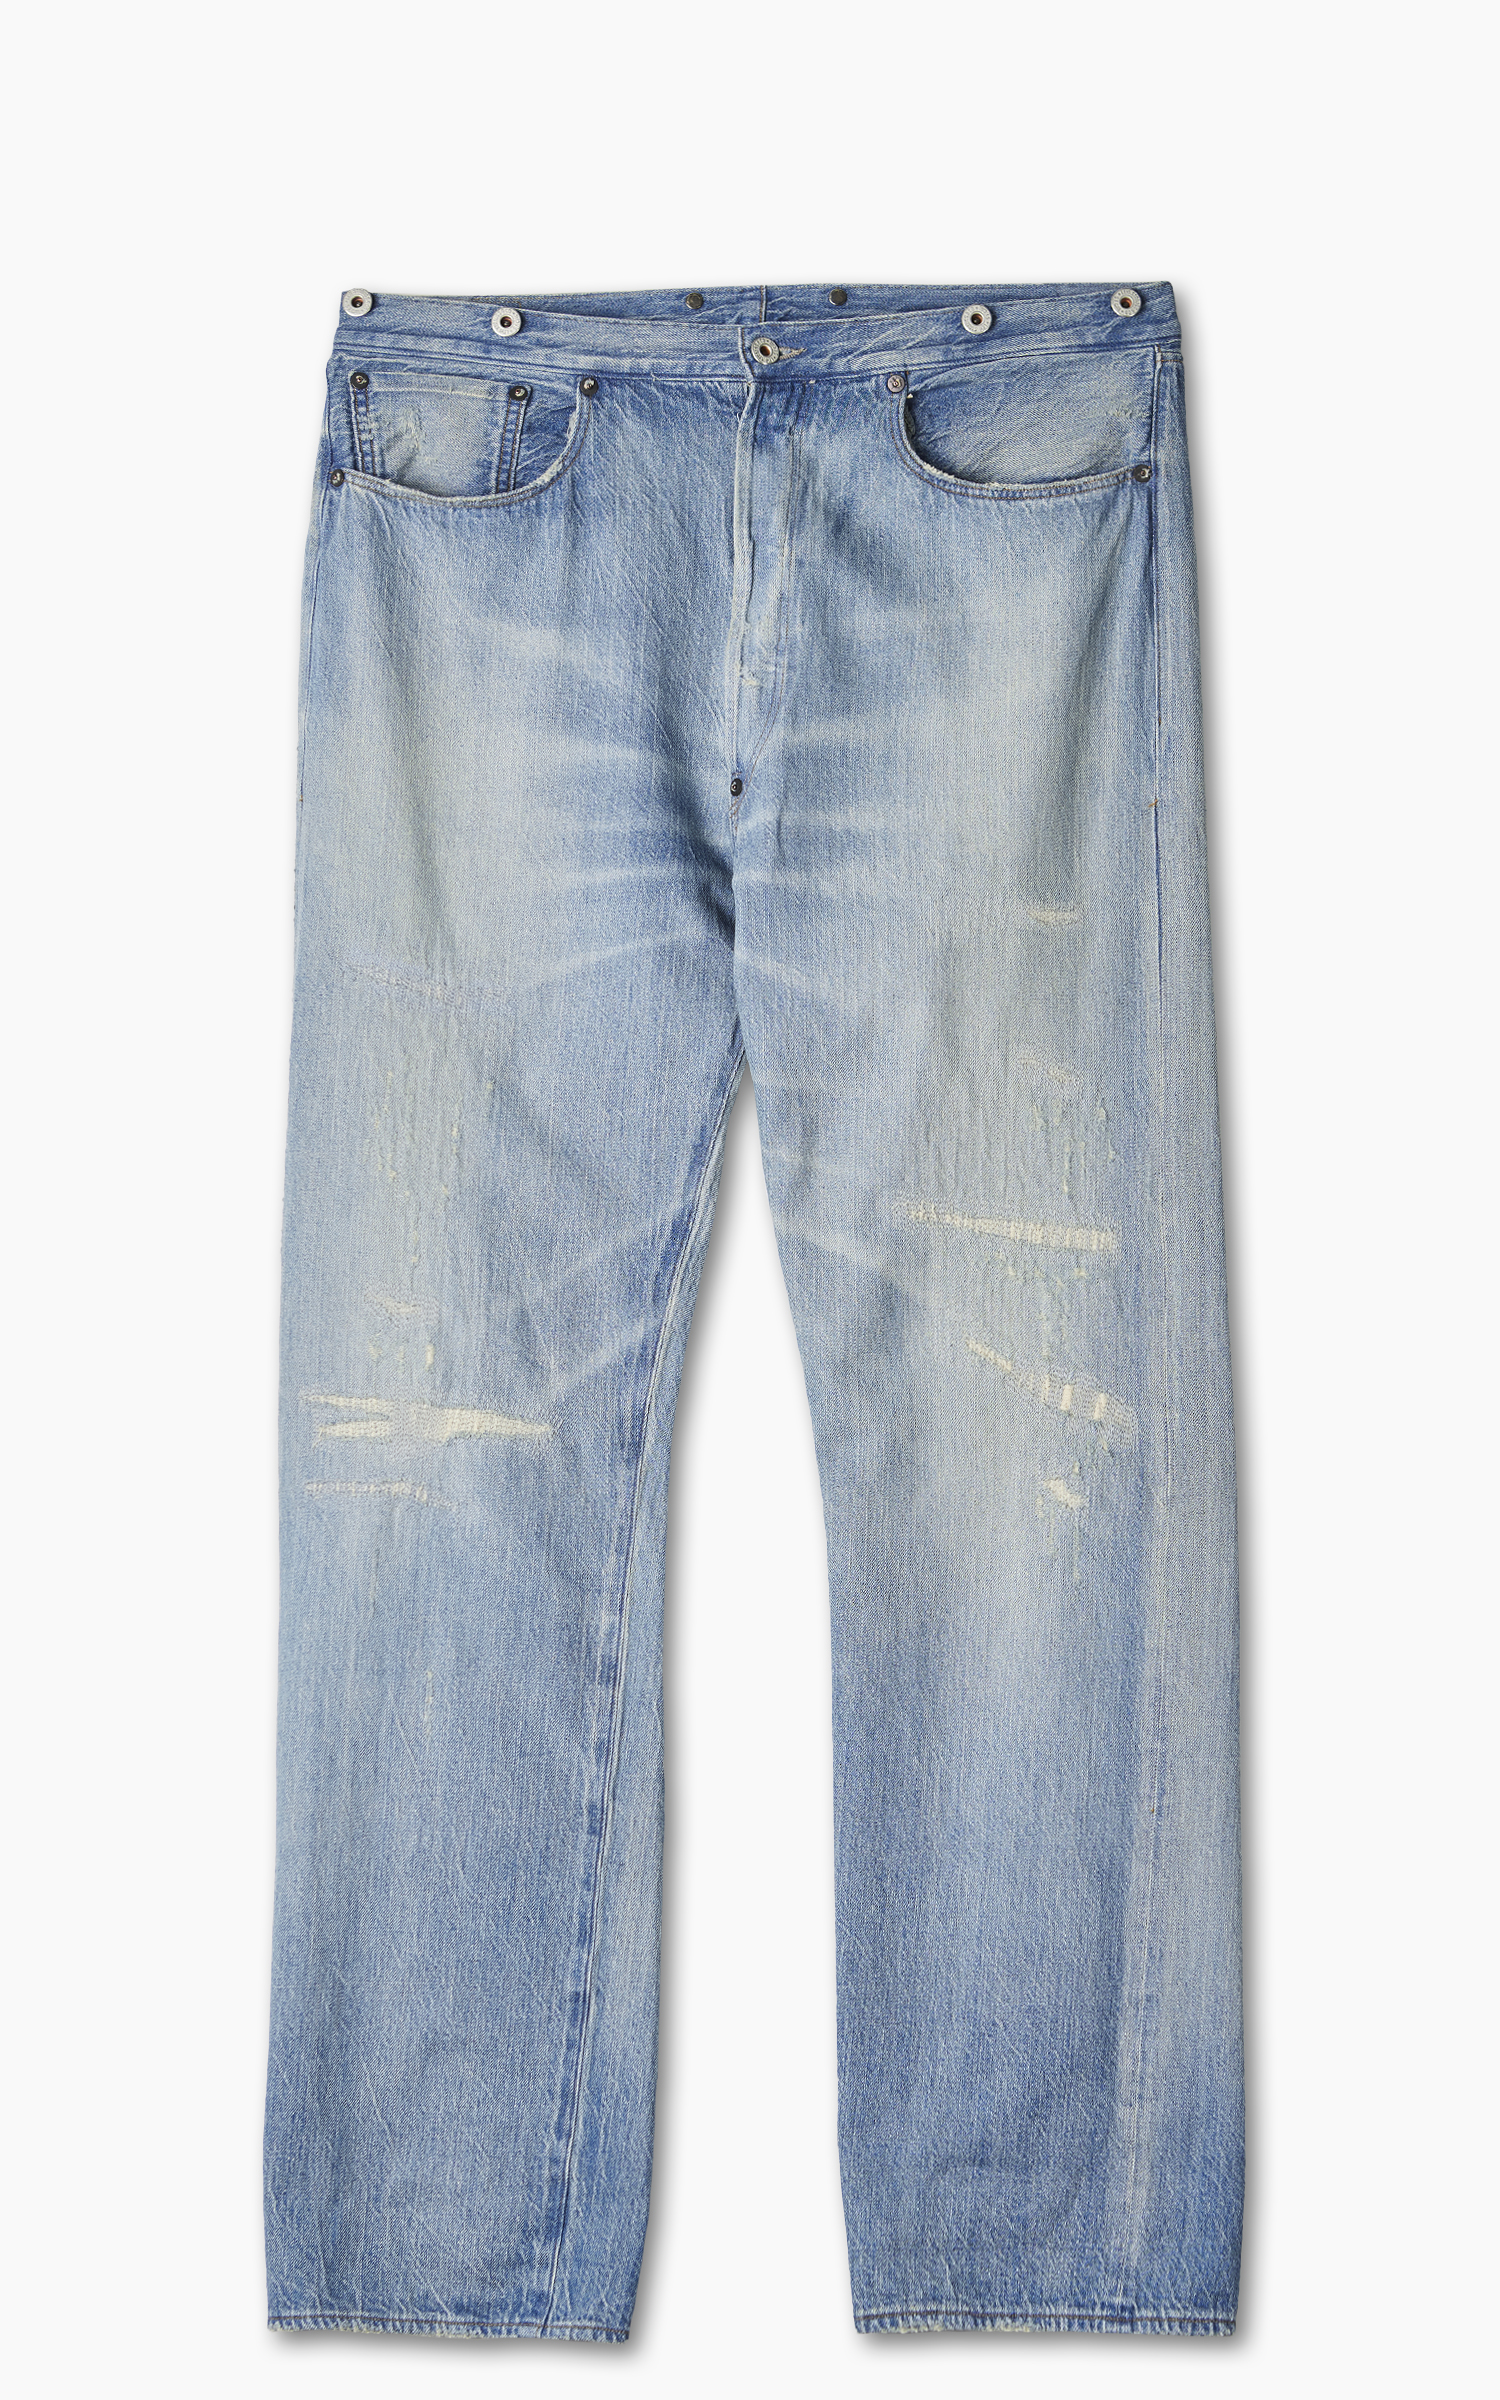 Levi's® Vintage Clothing 1890 XX501® Jeans Twin Peaks Indigo Worn In |  Cultizm